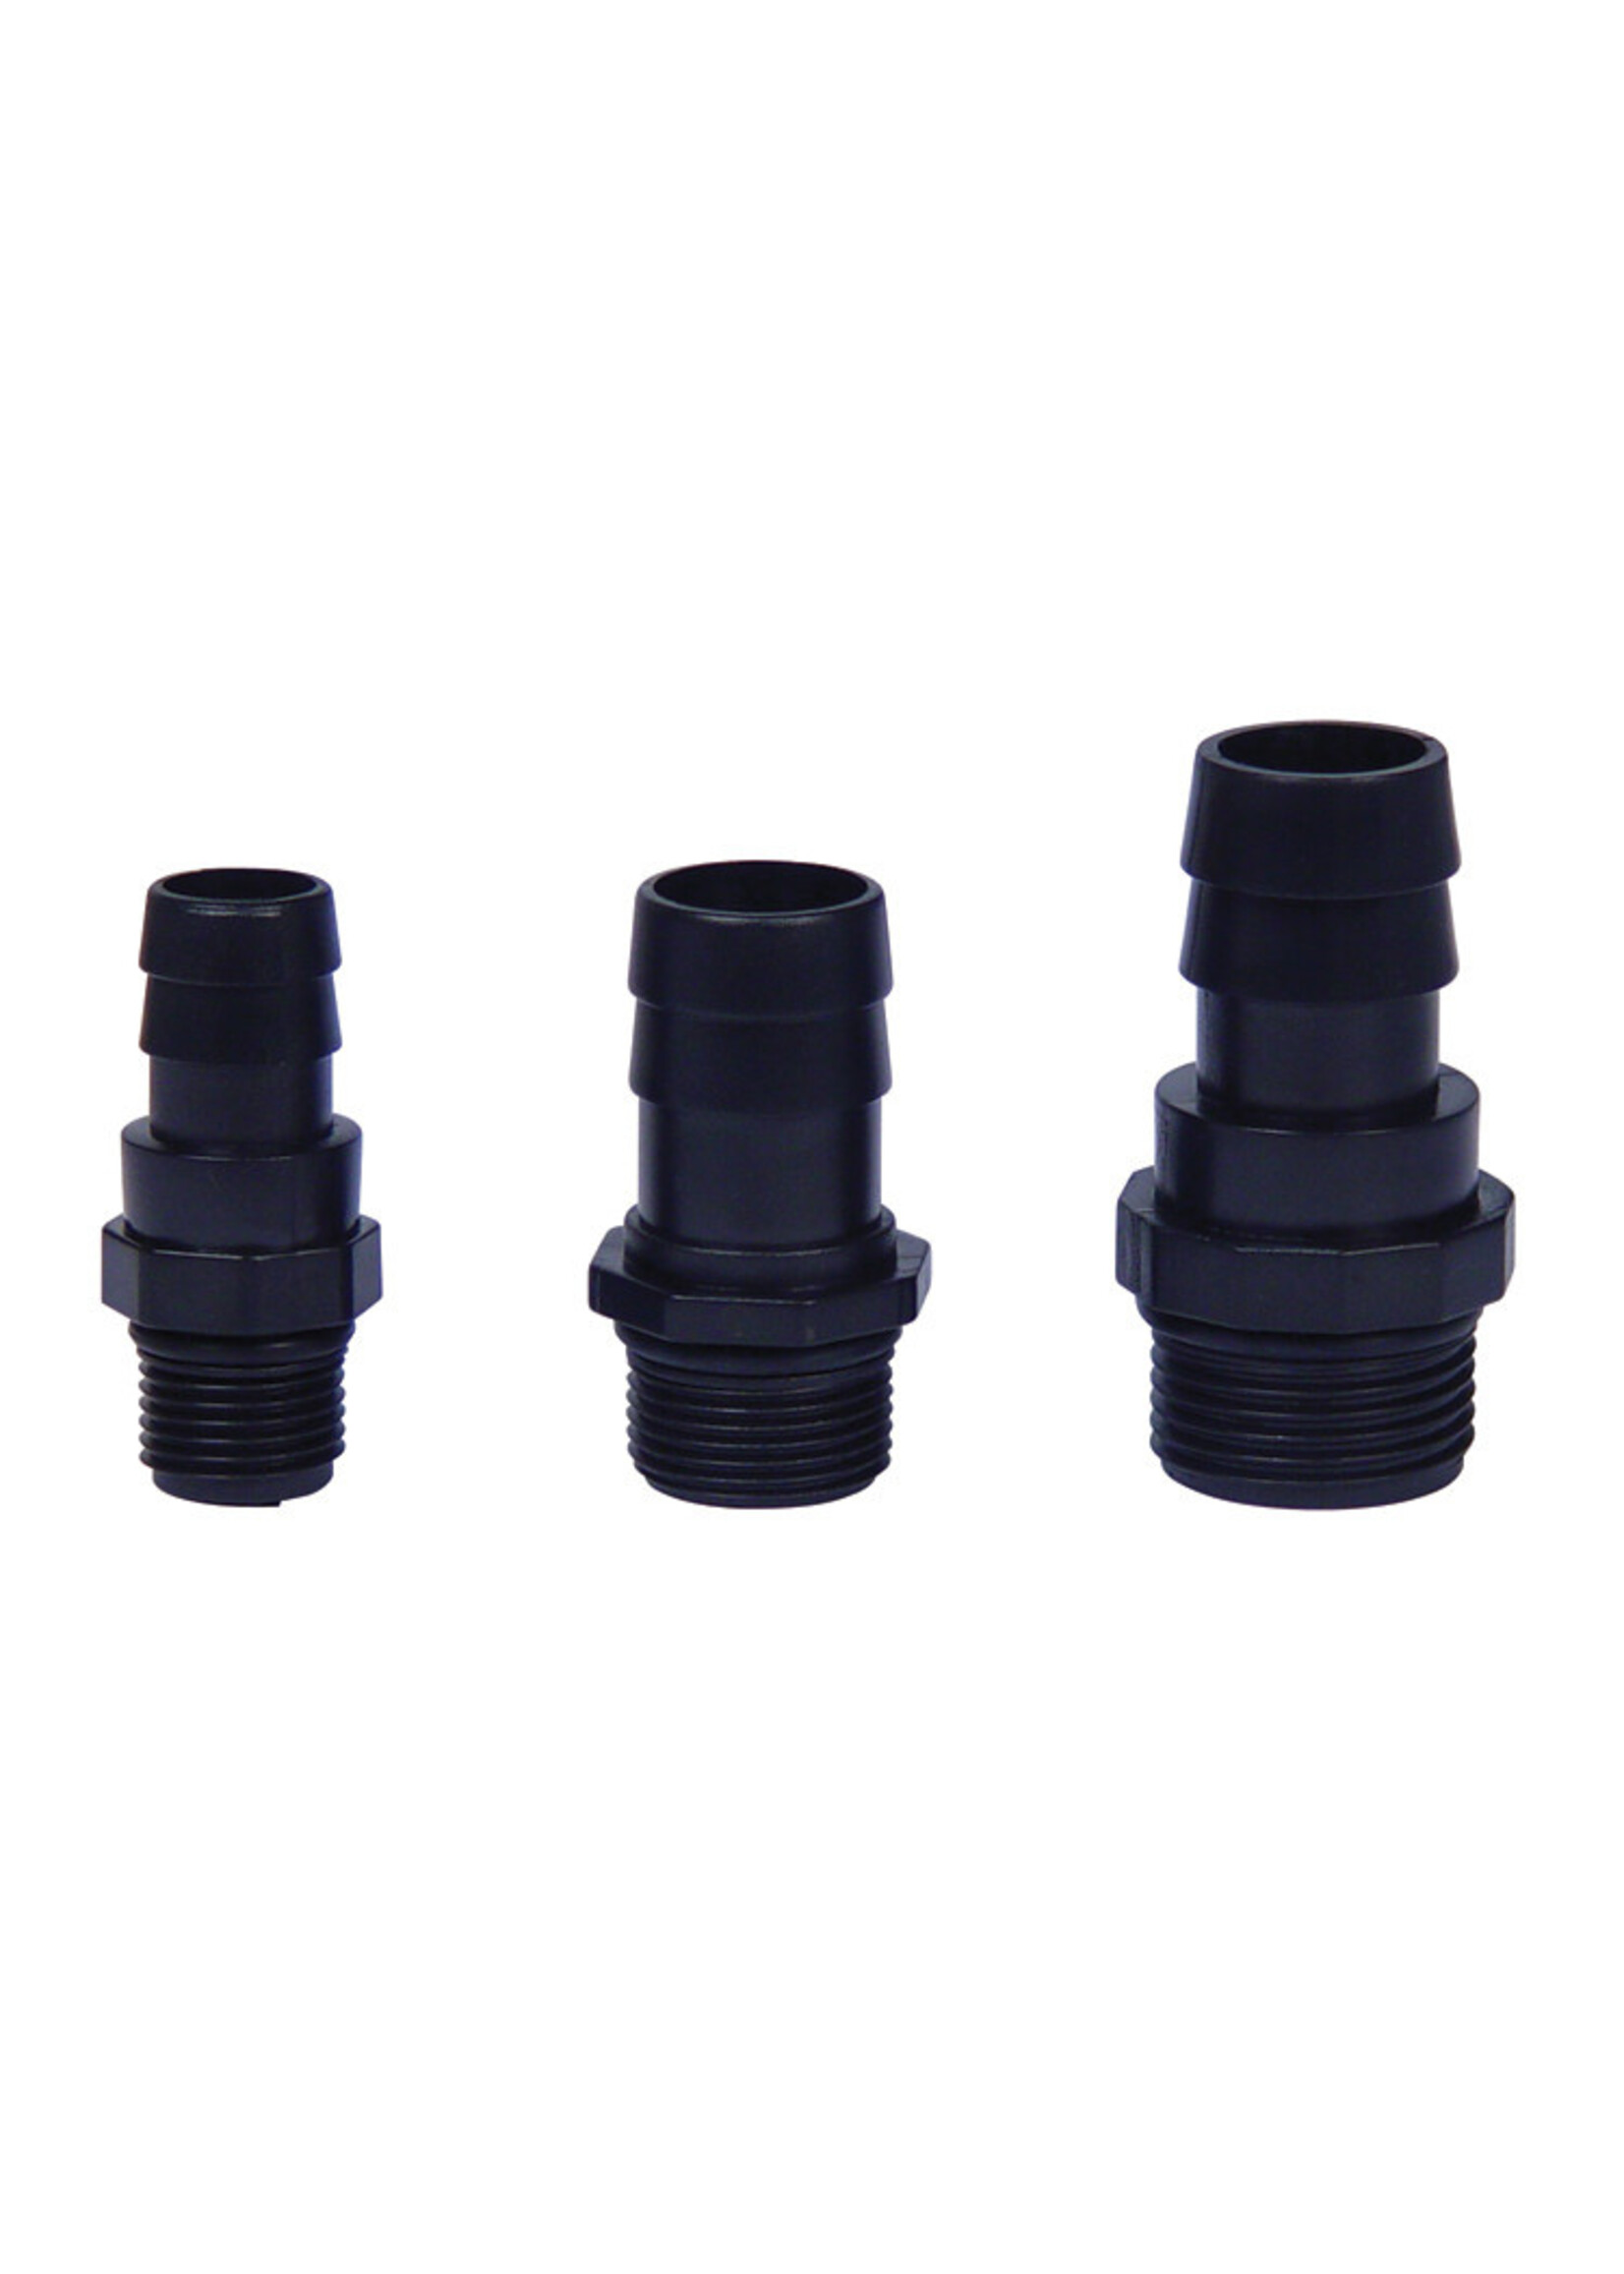 Eco Plus EcoPlus Replacement Eco 3/4 in Barbed x 1 in Threaded Fitting